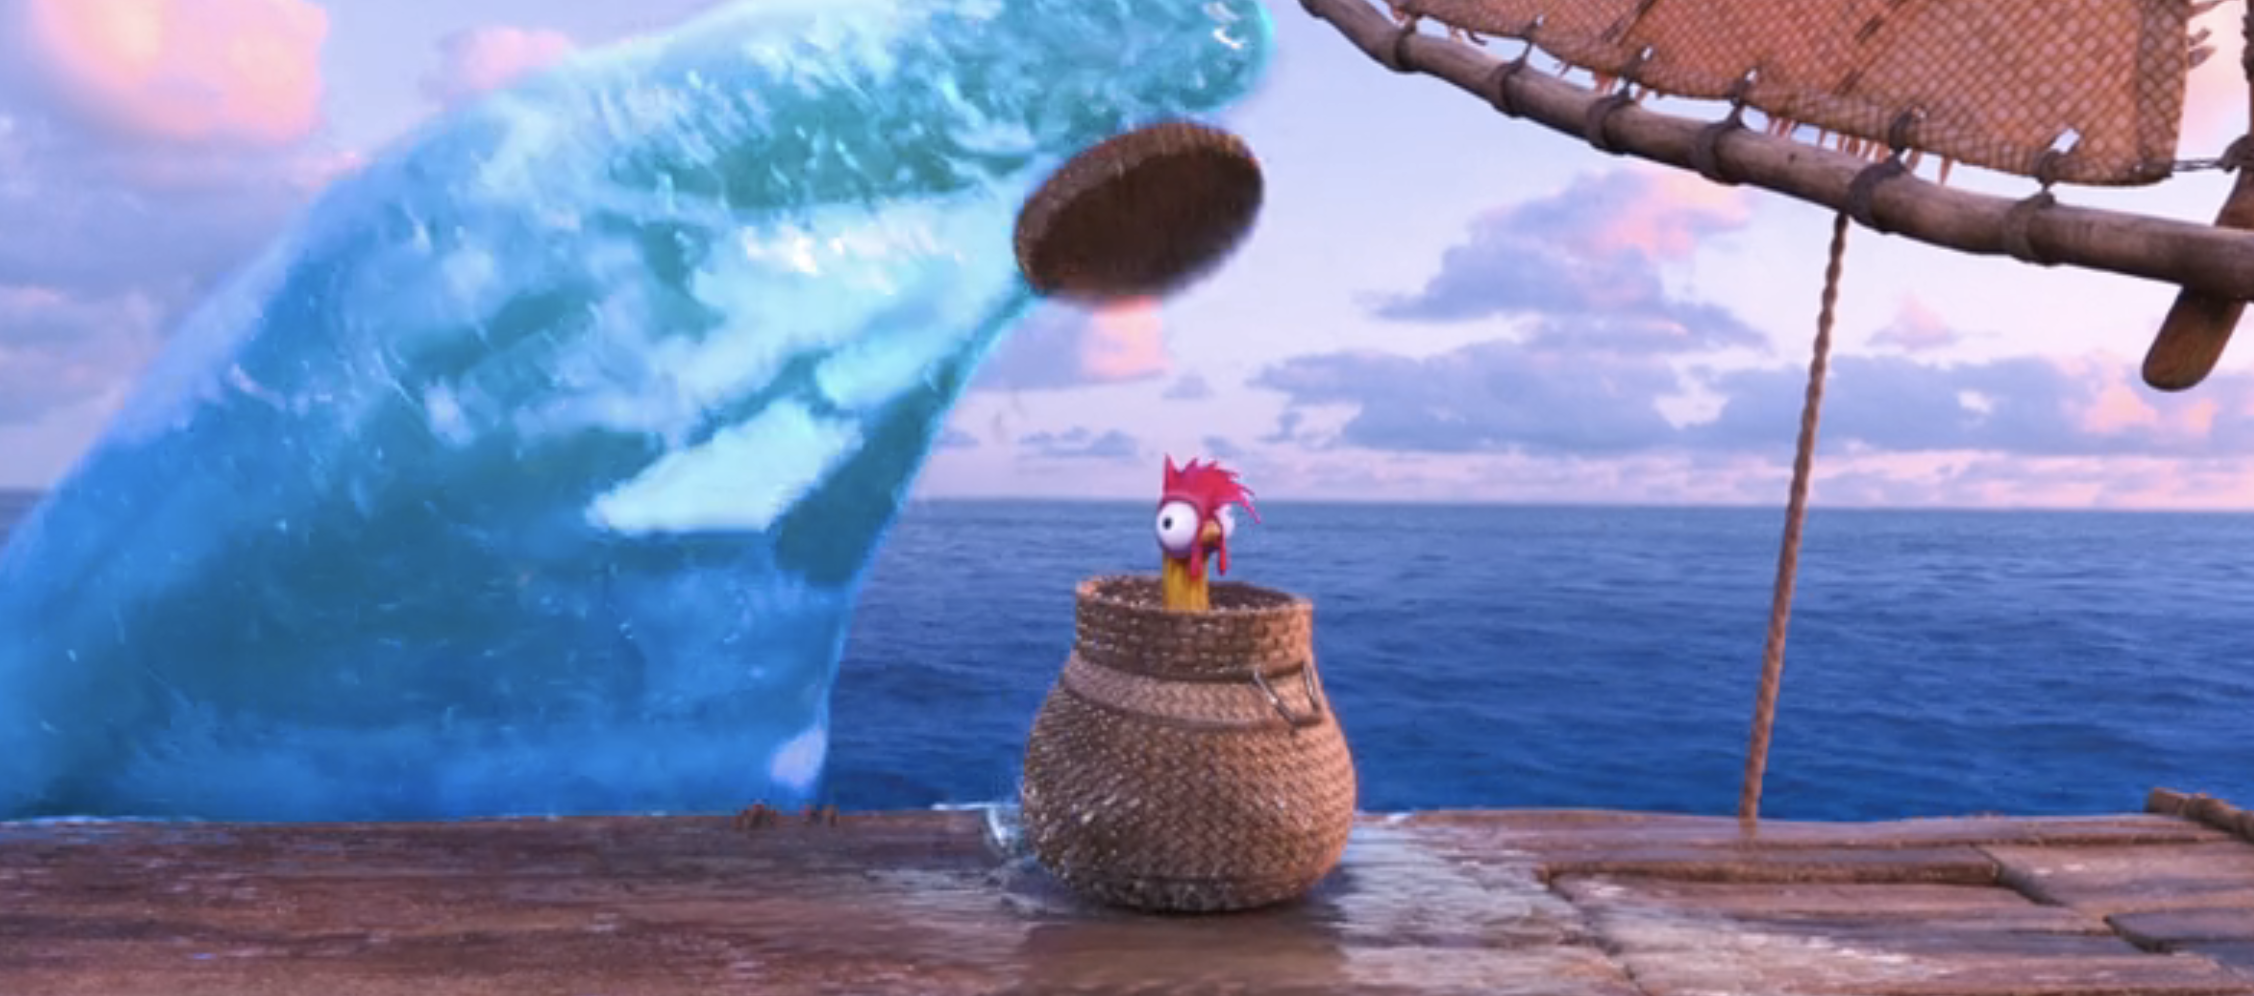 Animated character Heihei from Moana in a basket on a boat with ocean wave in the background